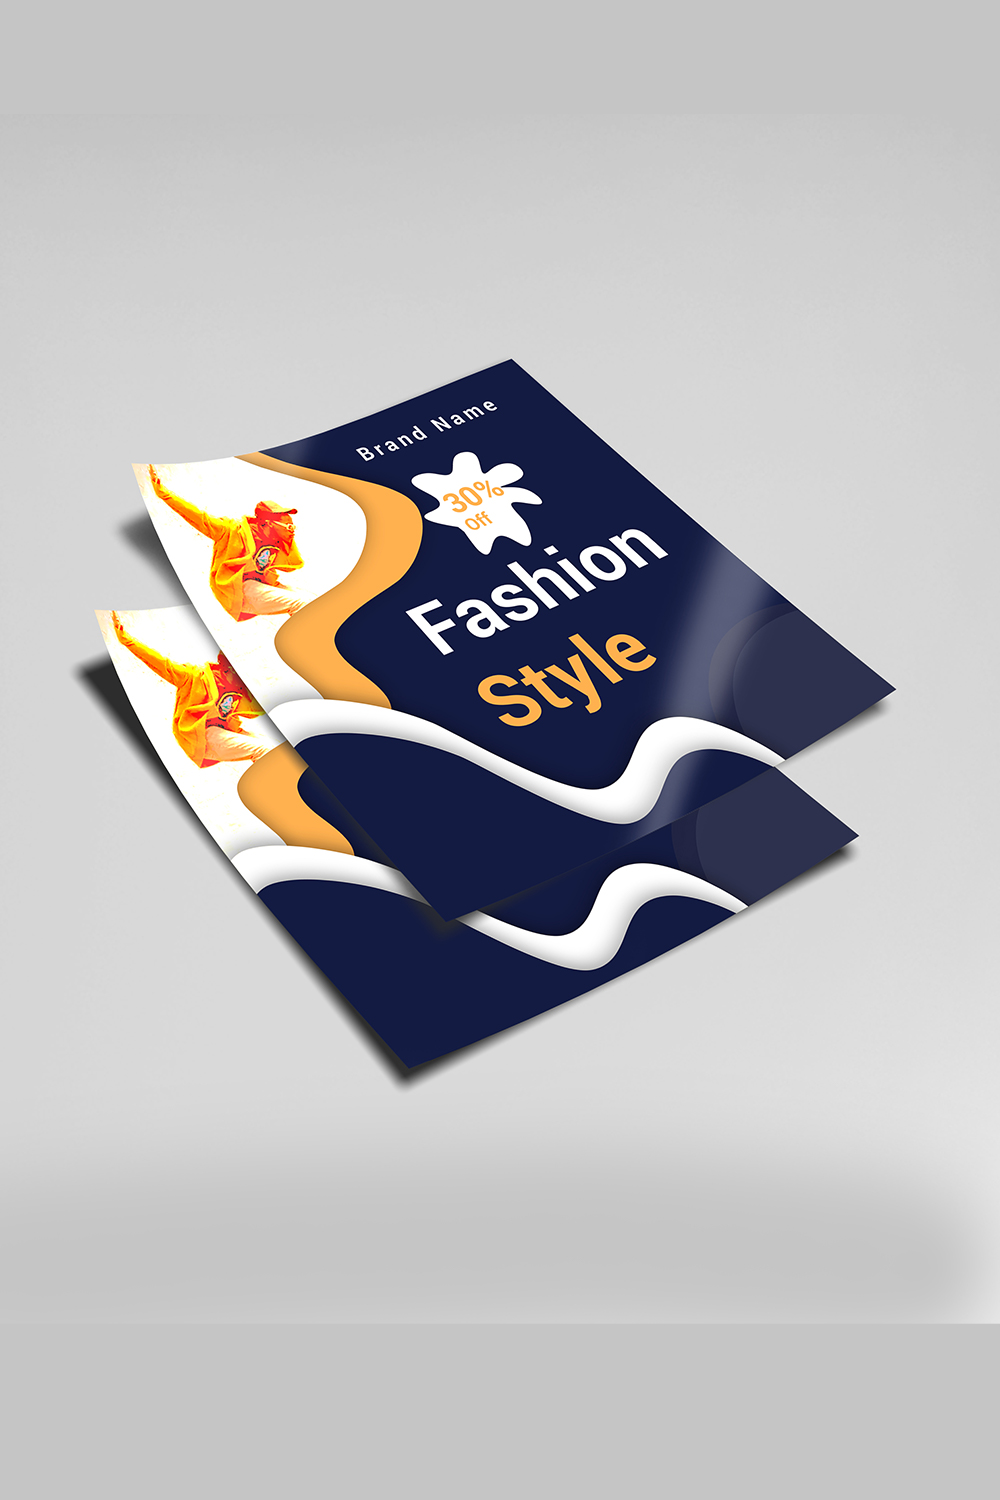 Fashio style poster design ( Best for fashion promotion ) pinterest preview image.